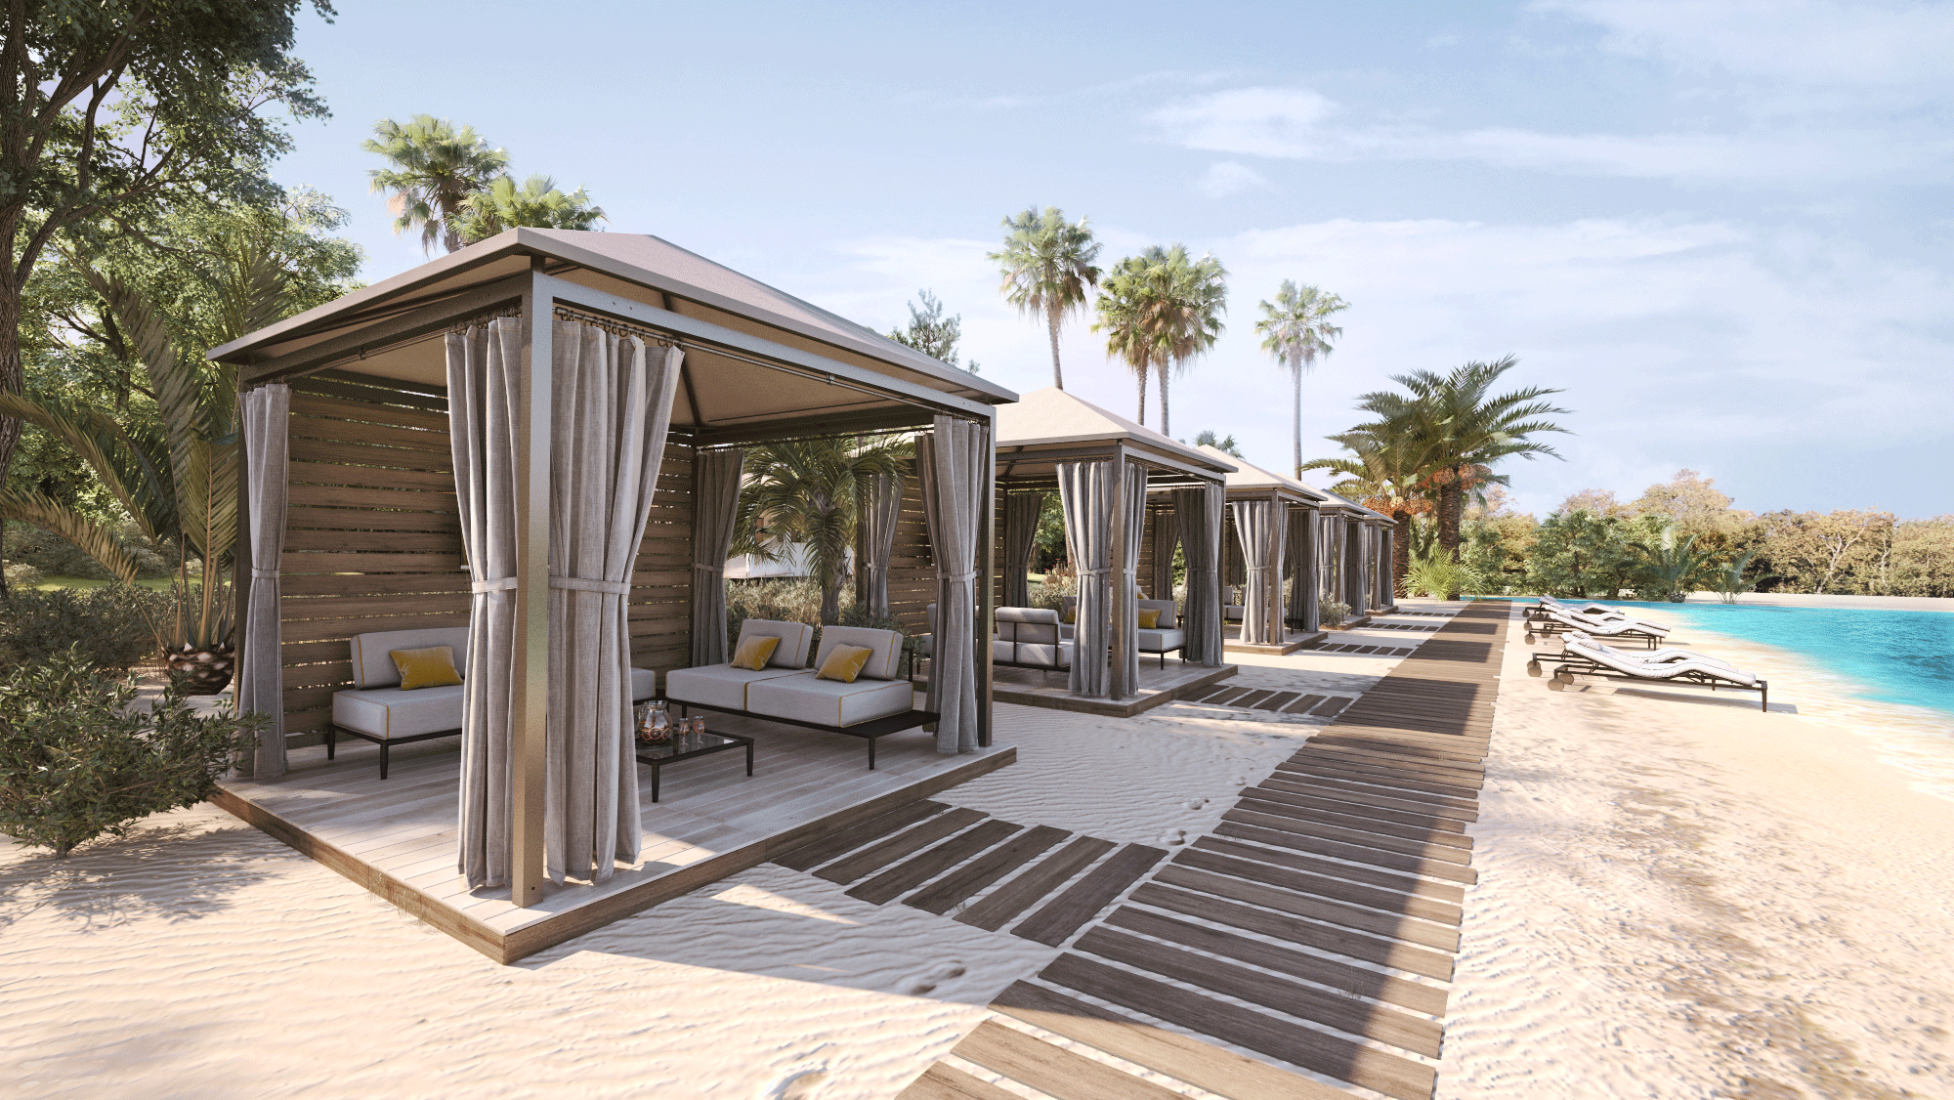 Academy Design's VIP cabana, photo taken from the left side, highlighting its corrosion-resistant 6061-T6 aluminum frame. The marine-grade fabric peaked roof without valance, slat system on the back side available in natural hardwood or powder-coated aluminum, and full privacy curtains made of marine-grade upholstery fabric exemplify luxury for architectural projects in resorts.